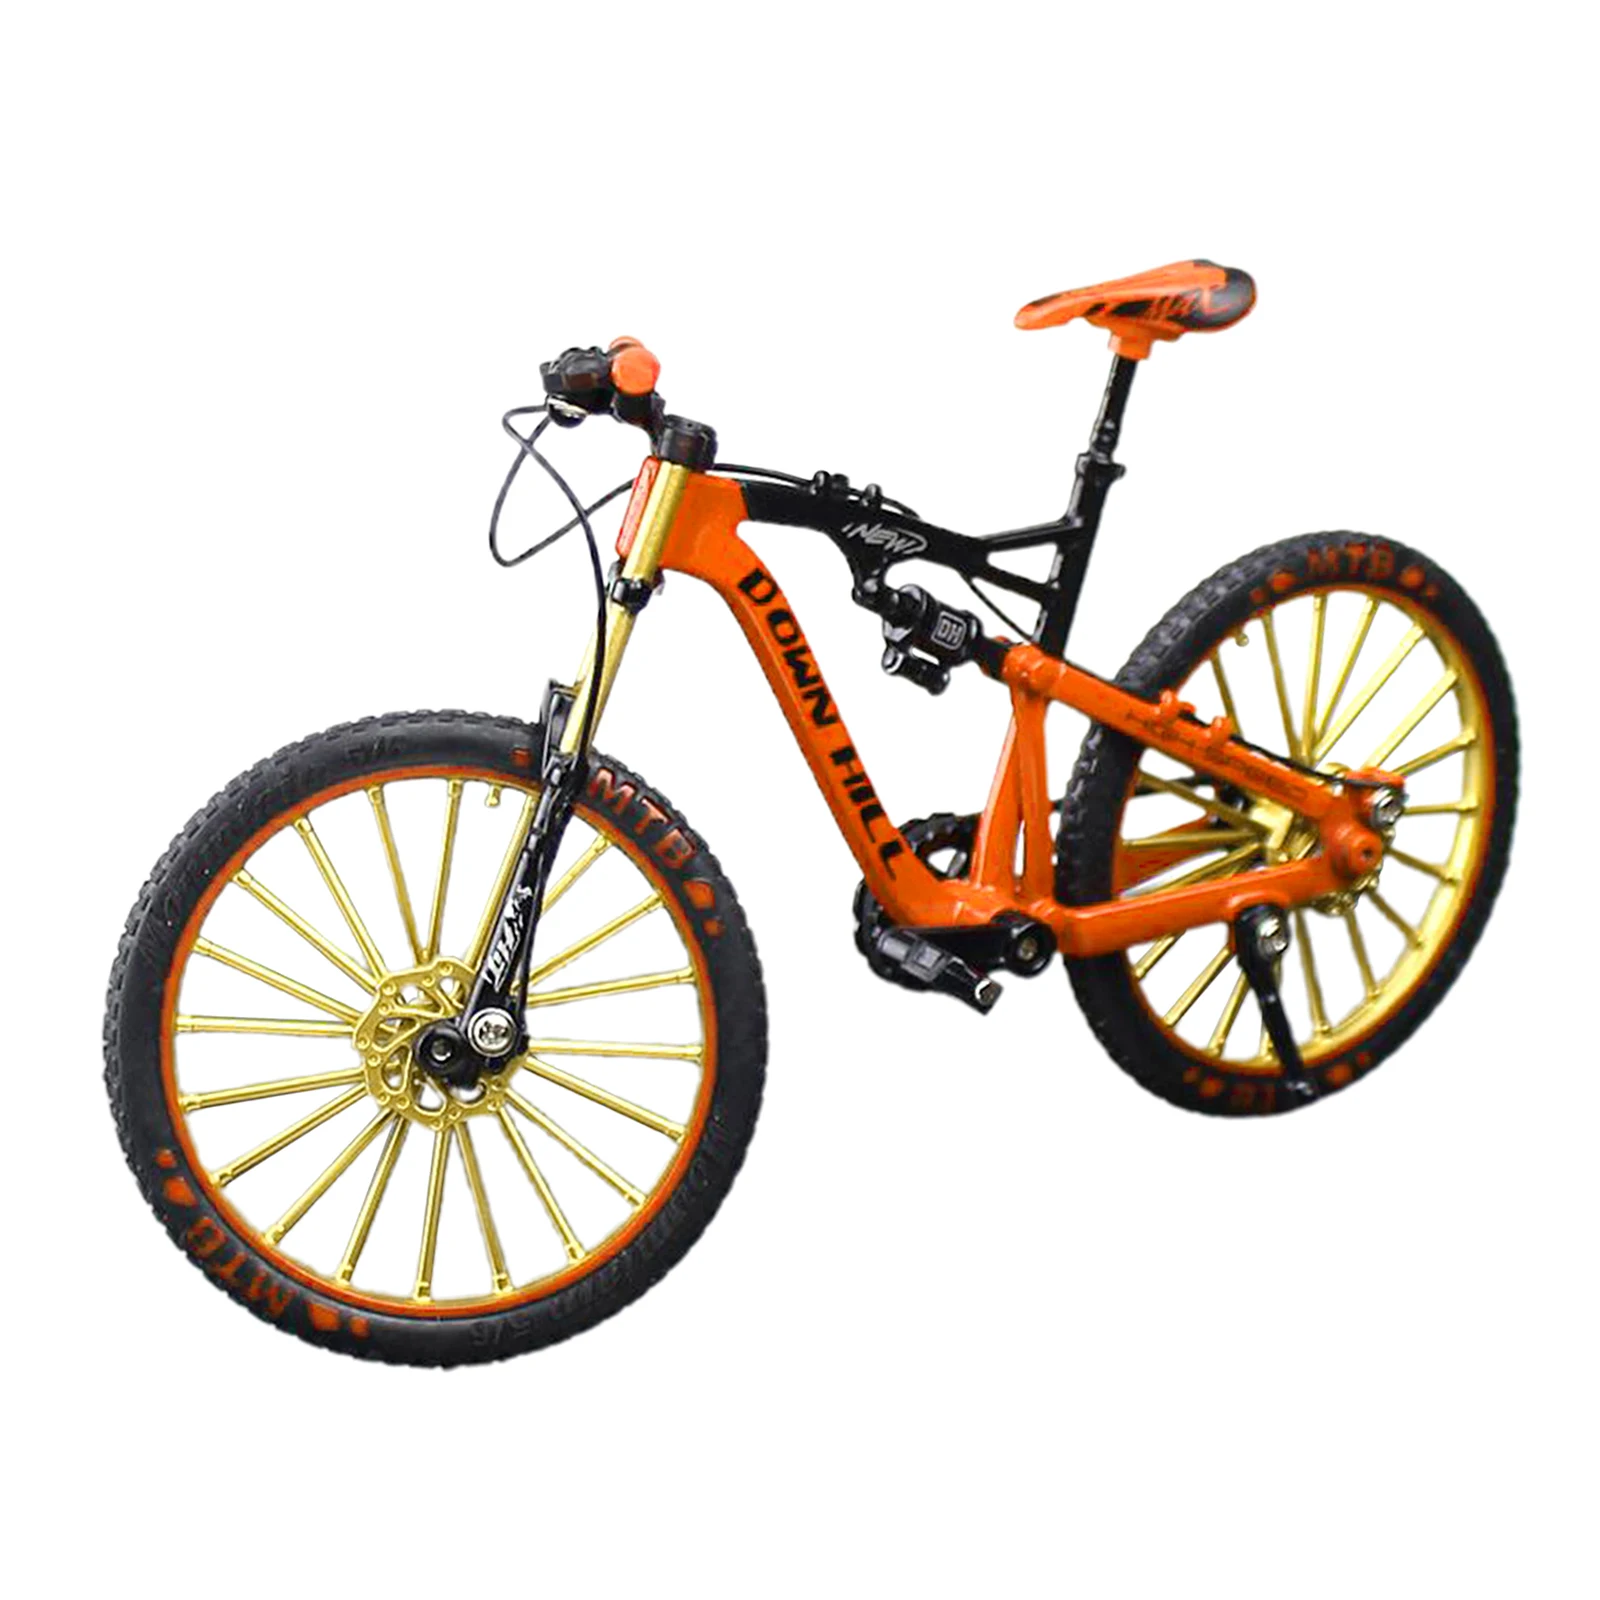 Bicycle Model Kids Bike Toy Mountain Bike Simulation Mini Model Collection Toys Diecast Toy for Collection Decor